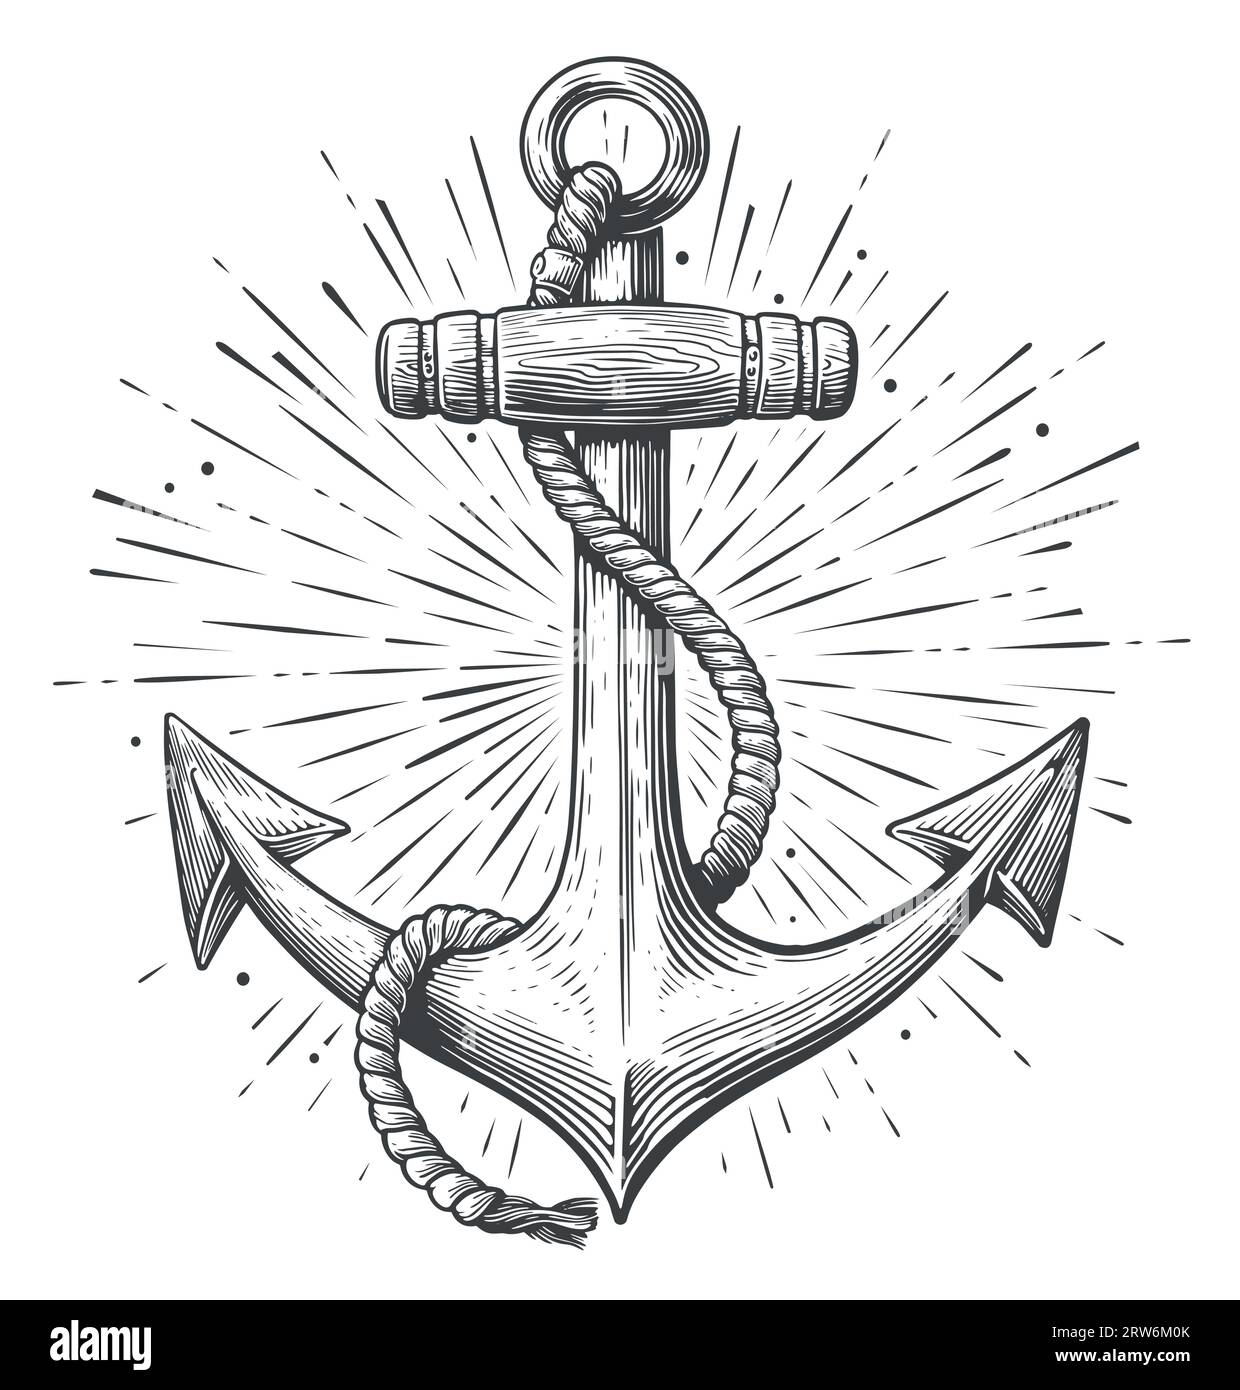 Vintage sea anchor with rope in engraving style. Ship hook sketch vector illustration Stock Vector